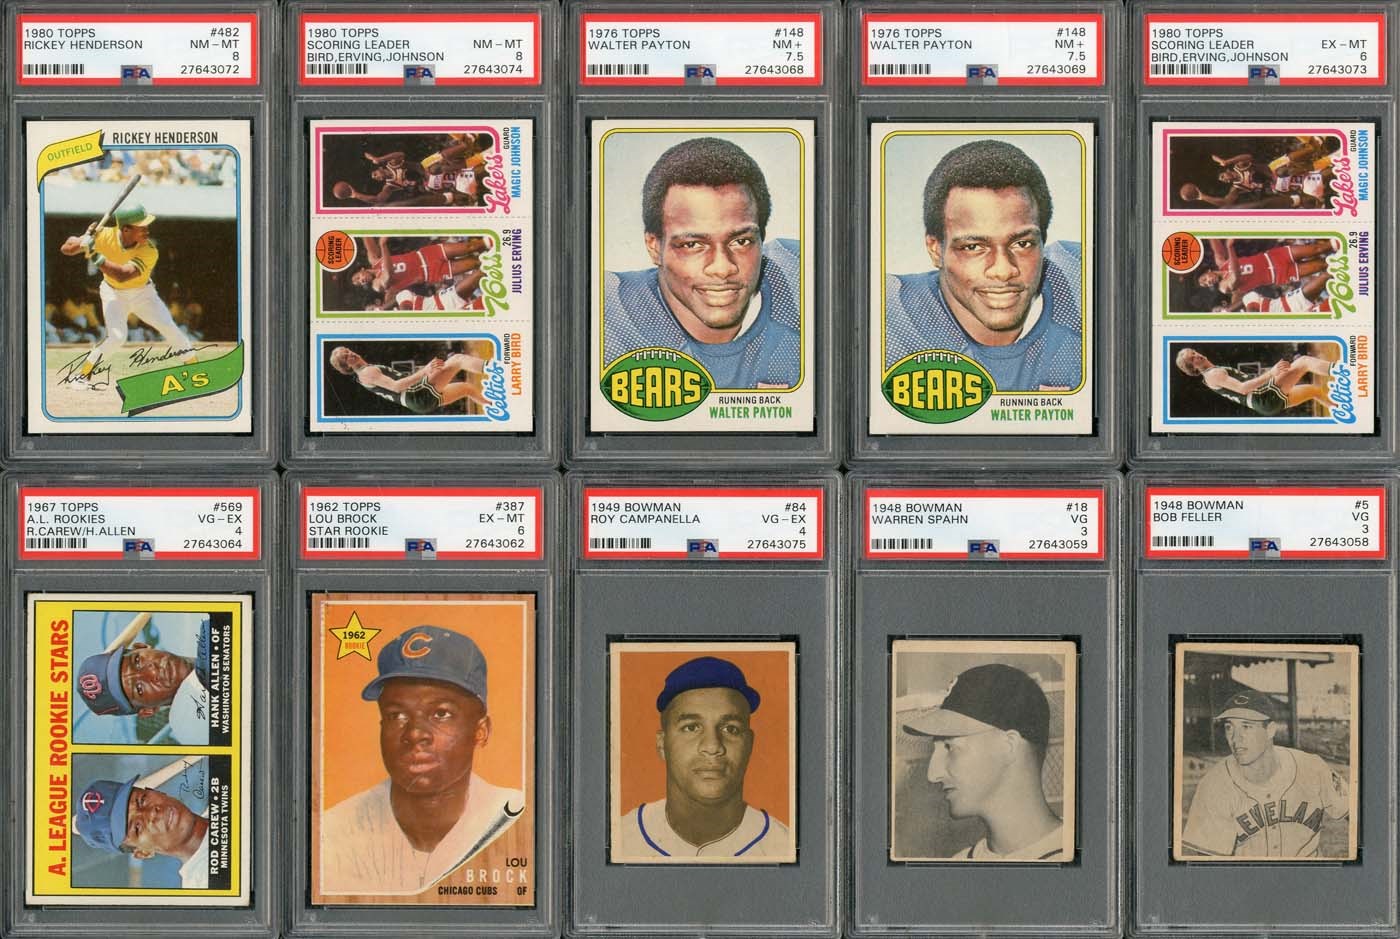 1948-1980 Topps and Bowman Multi-Sport PSA Graded Rookie Card Collection